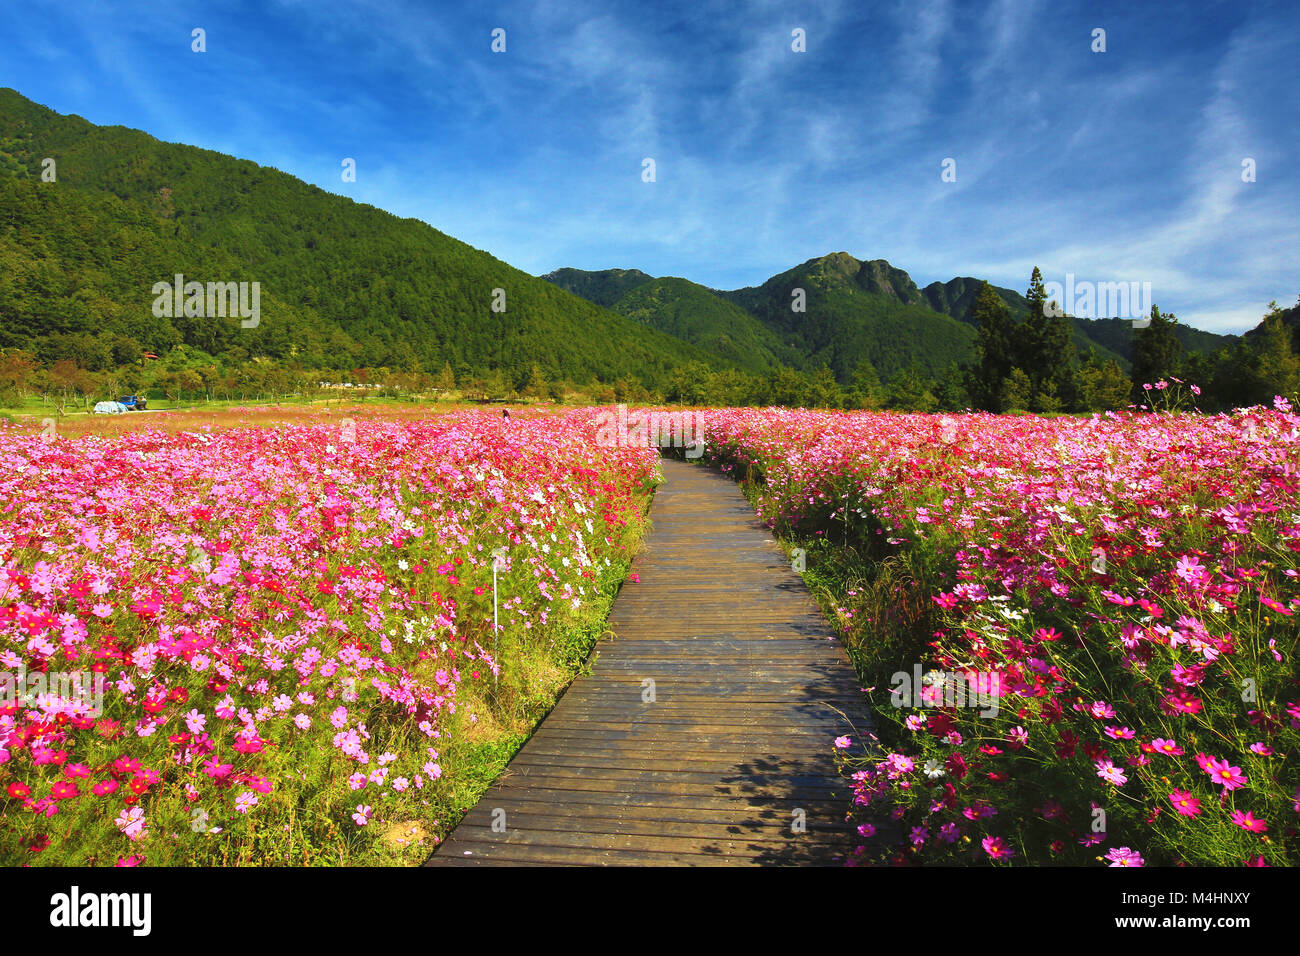 Beautiful scenery of cosmos flowers with path,many pink,white and red flowers blooming in the field in a sunny day Stock Photo